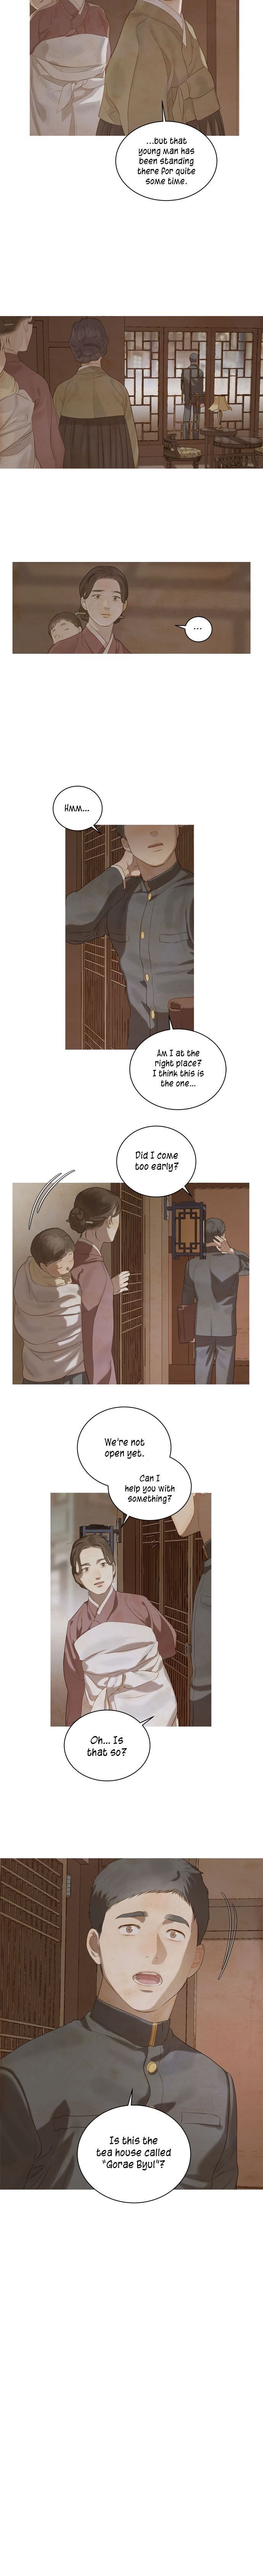 Gorae Byul - The Gyeongseong Mermaid - Chapter 28 Page 9